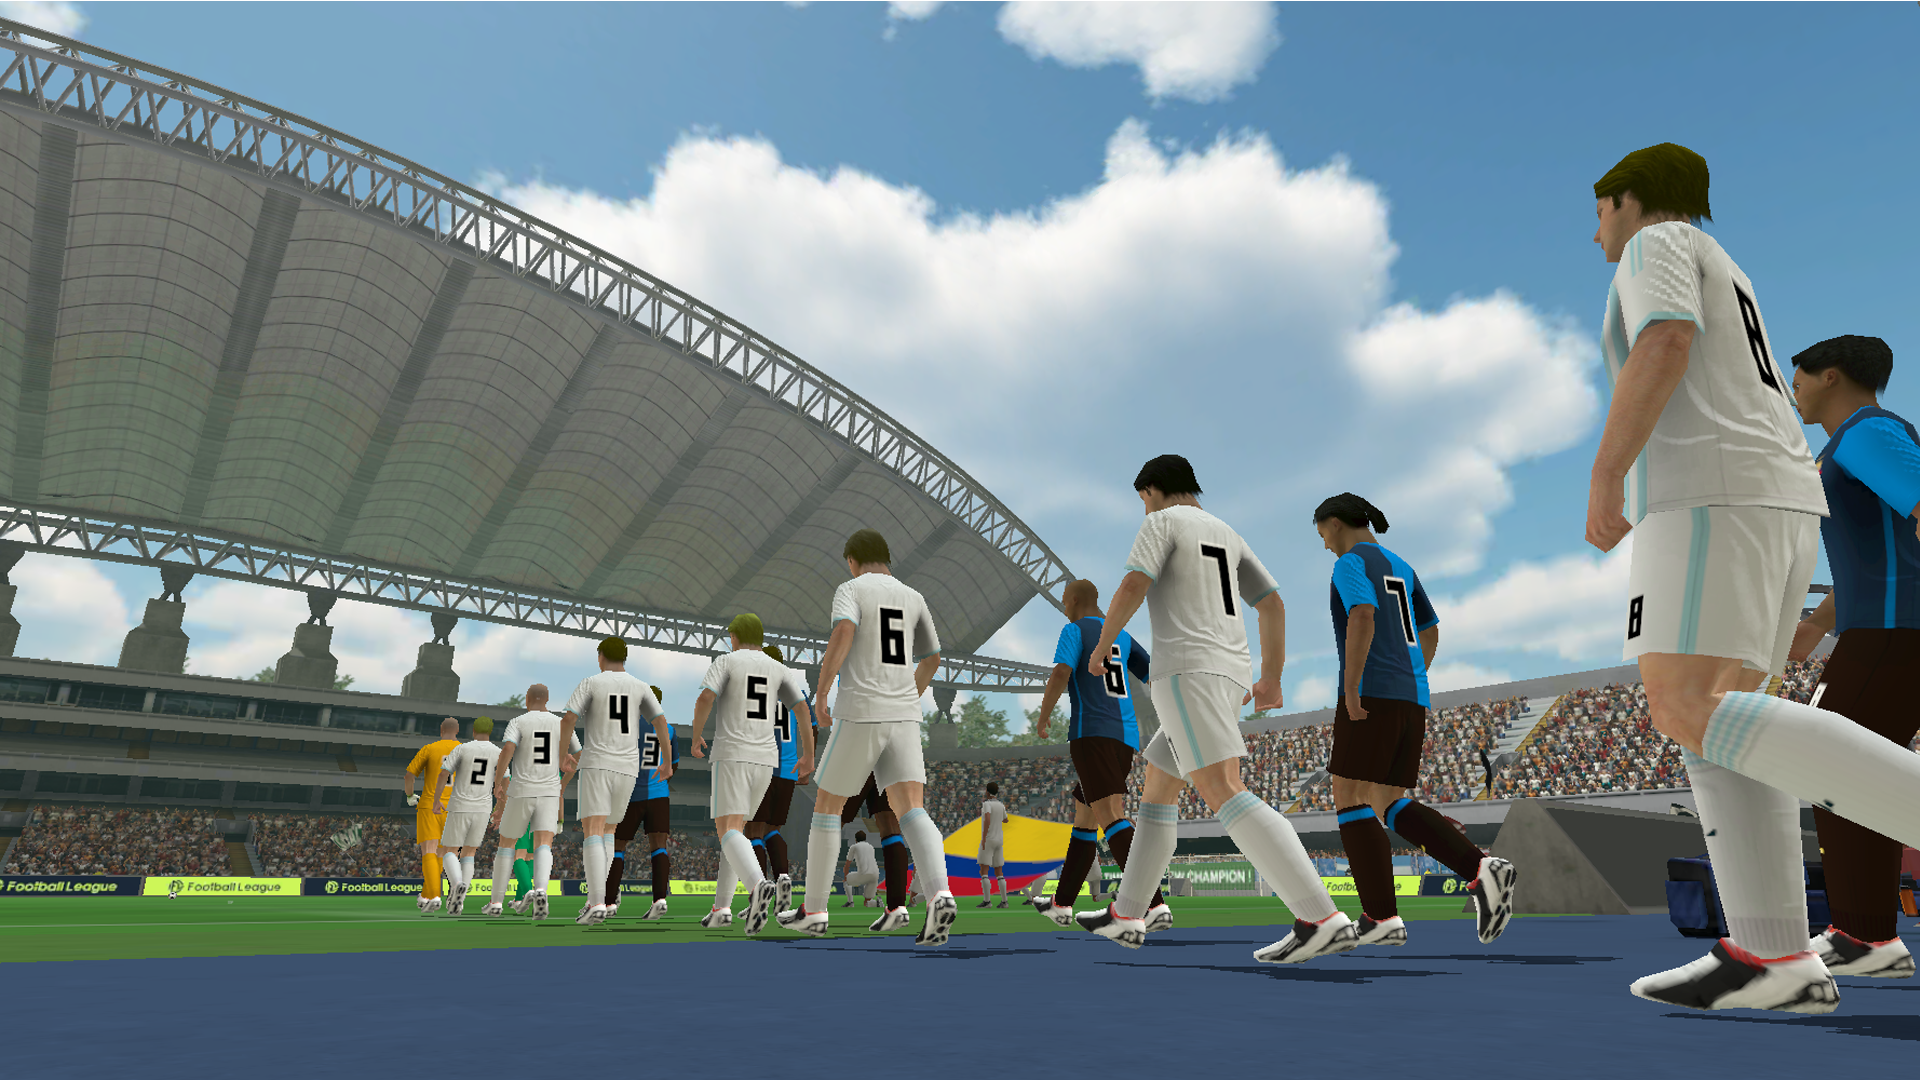 Head Soccer - World Football for Android - Download the APK from Uptodown